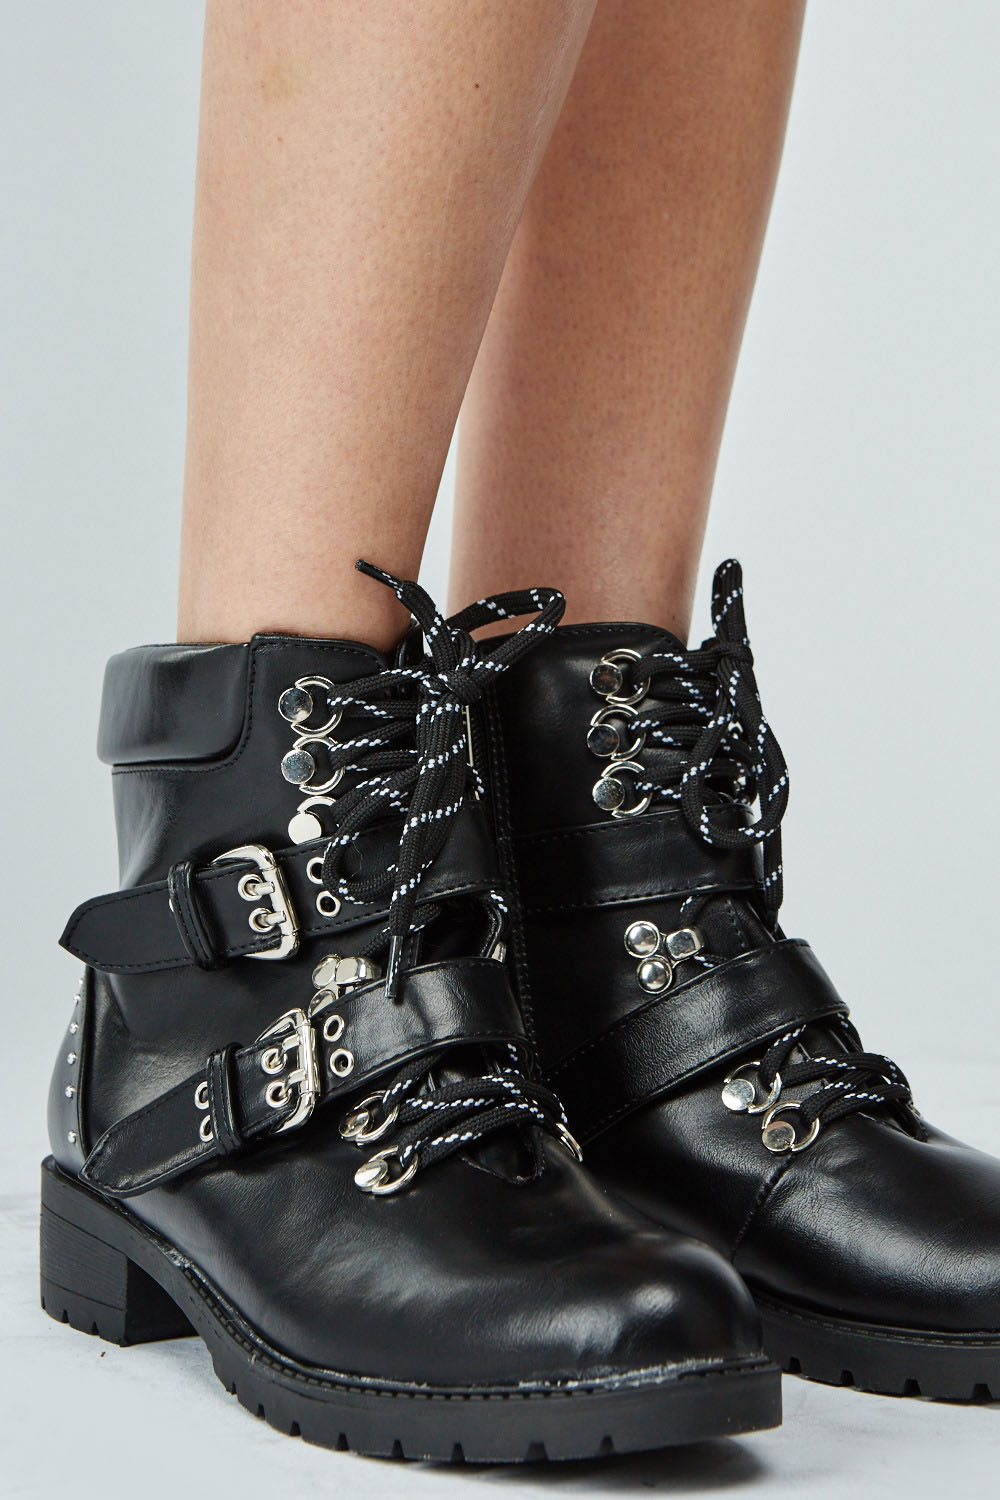 Lace Up Biker Boots - Limited edition | Discount Designer Stock